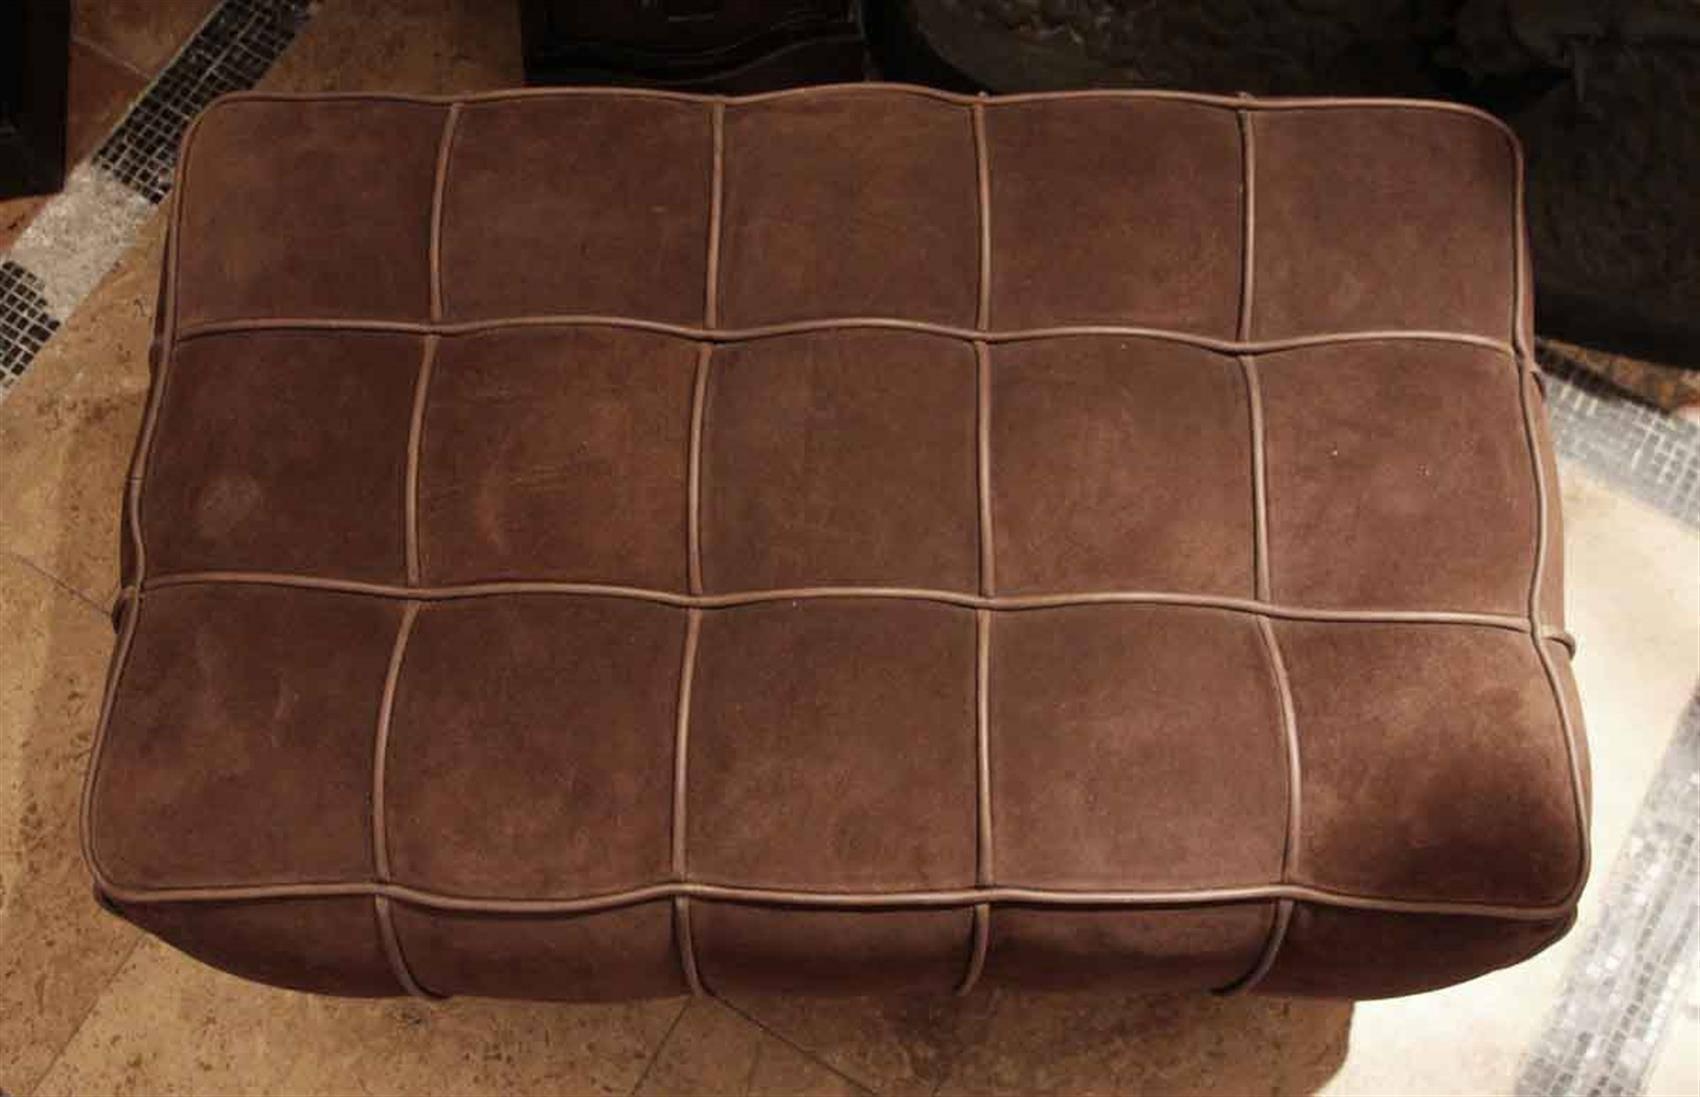 American 1990s Warm Brown Suede Leather Ottoman with a Wooden Base and a Leather Handle